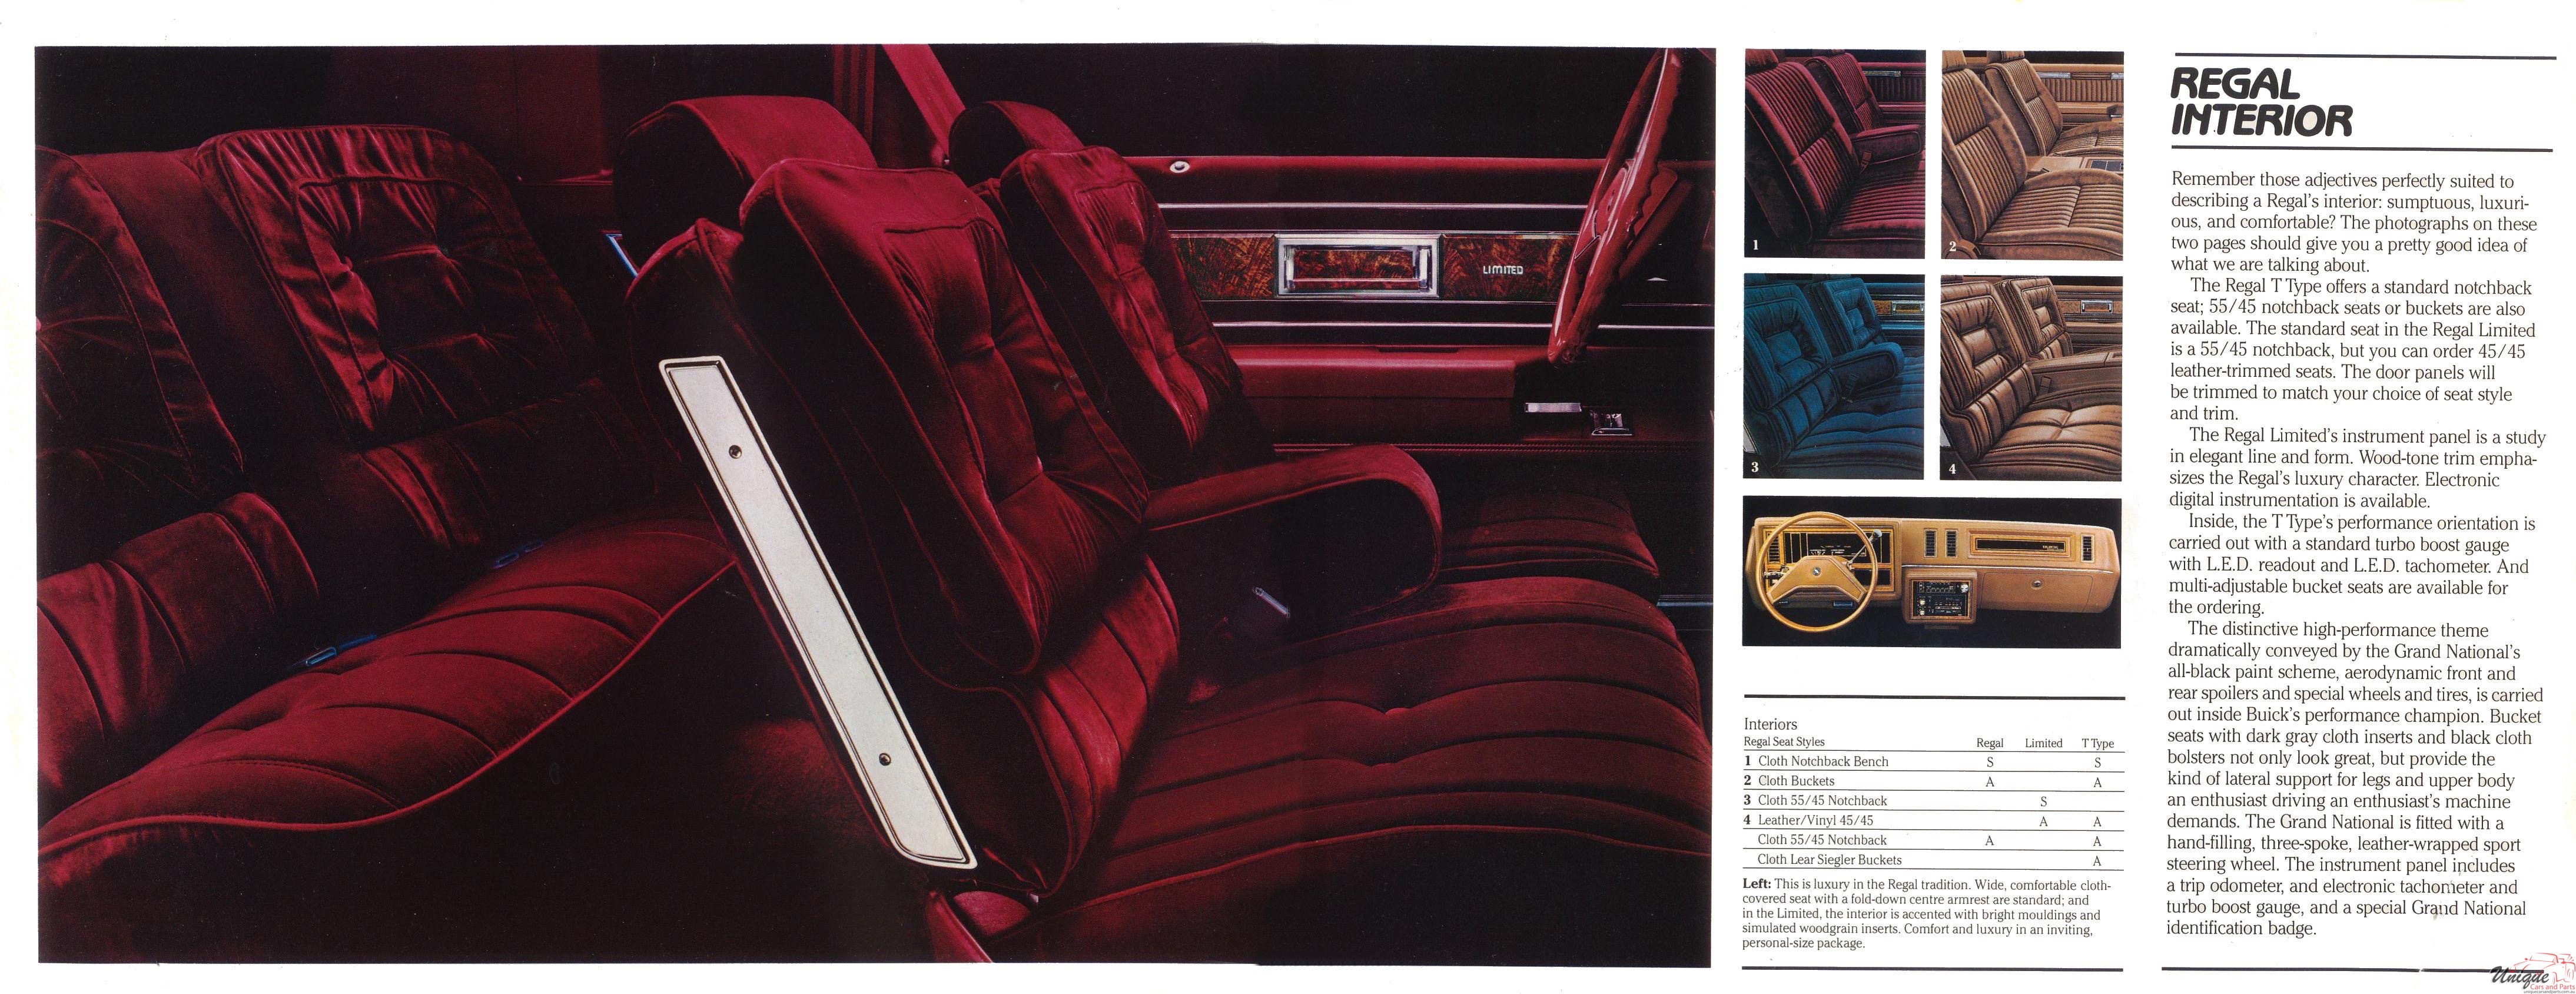 1985 Buick Regal Canadian Brochure Page 4